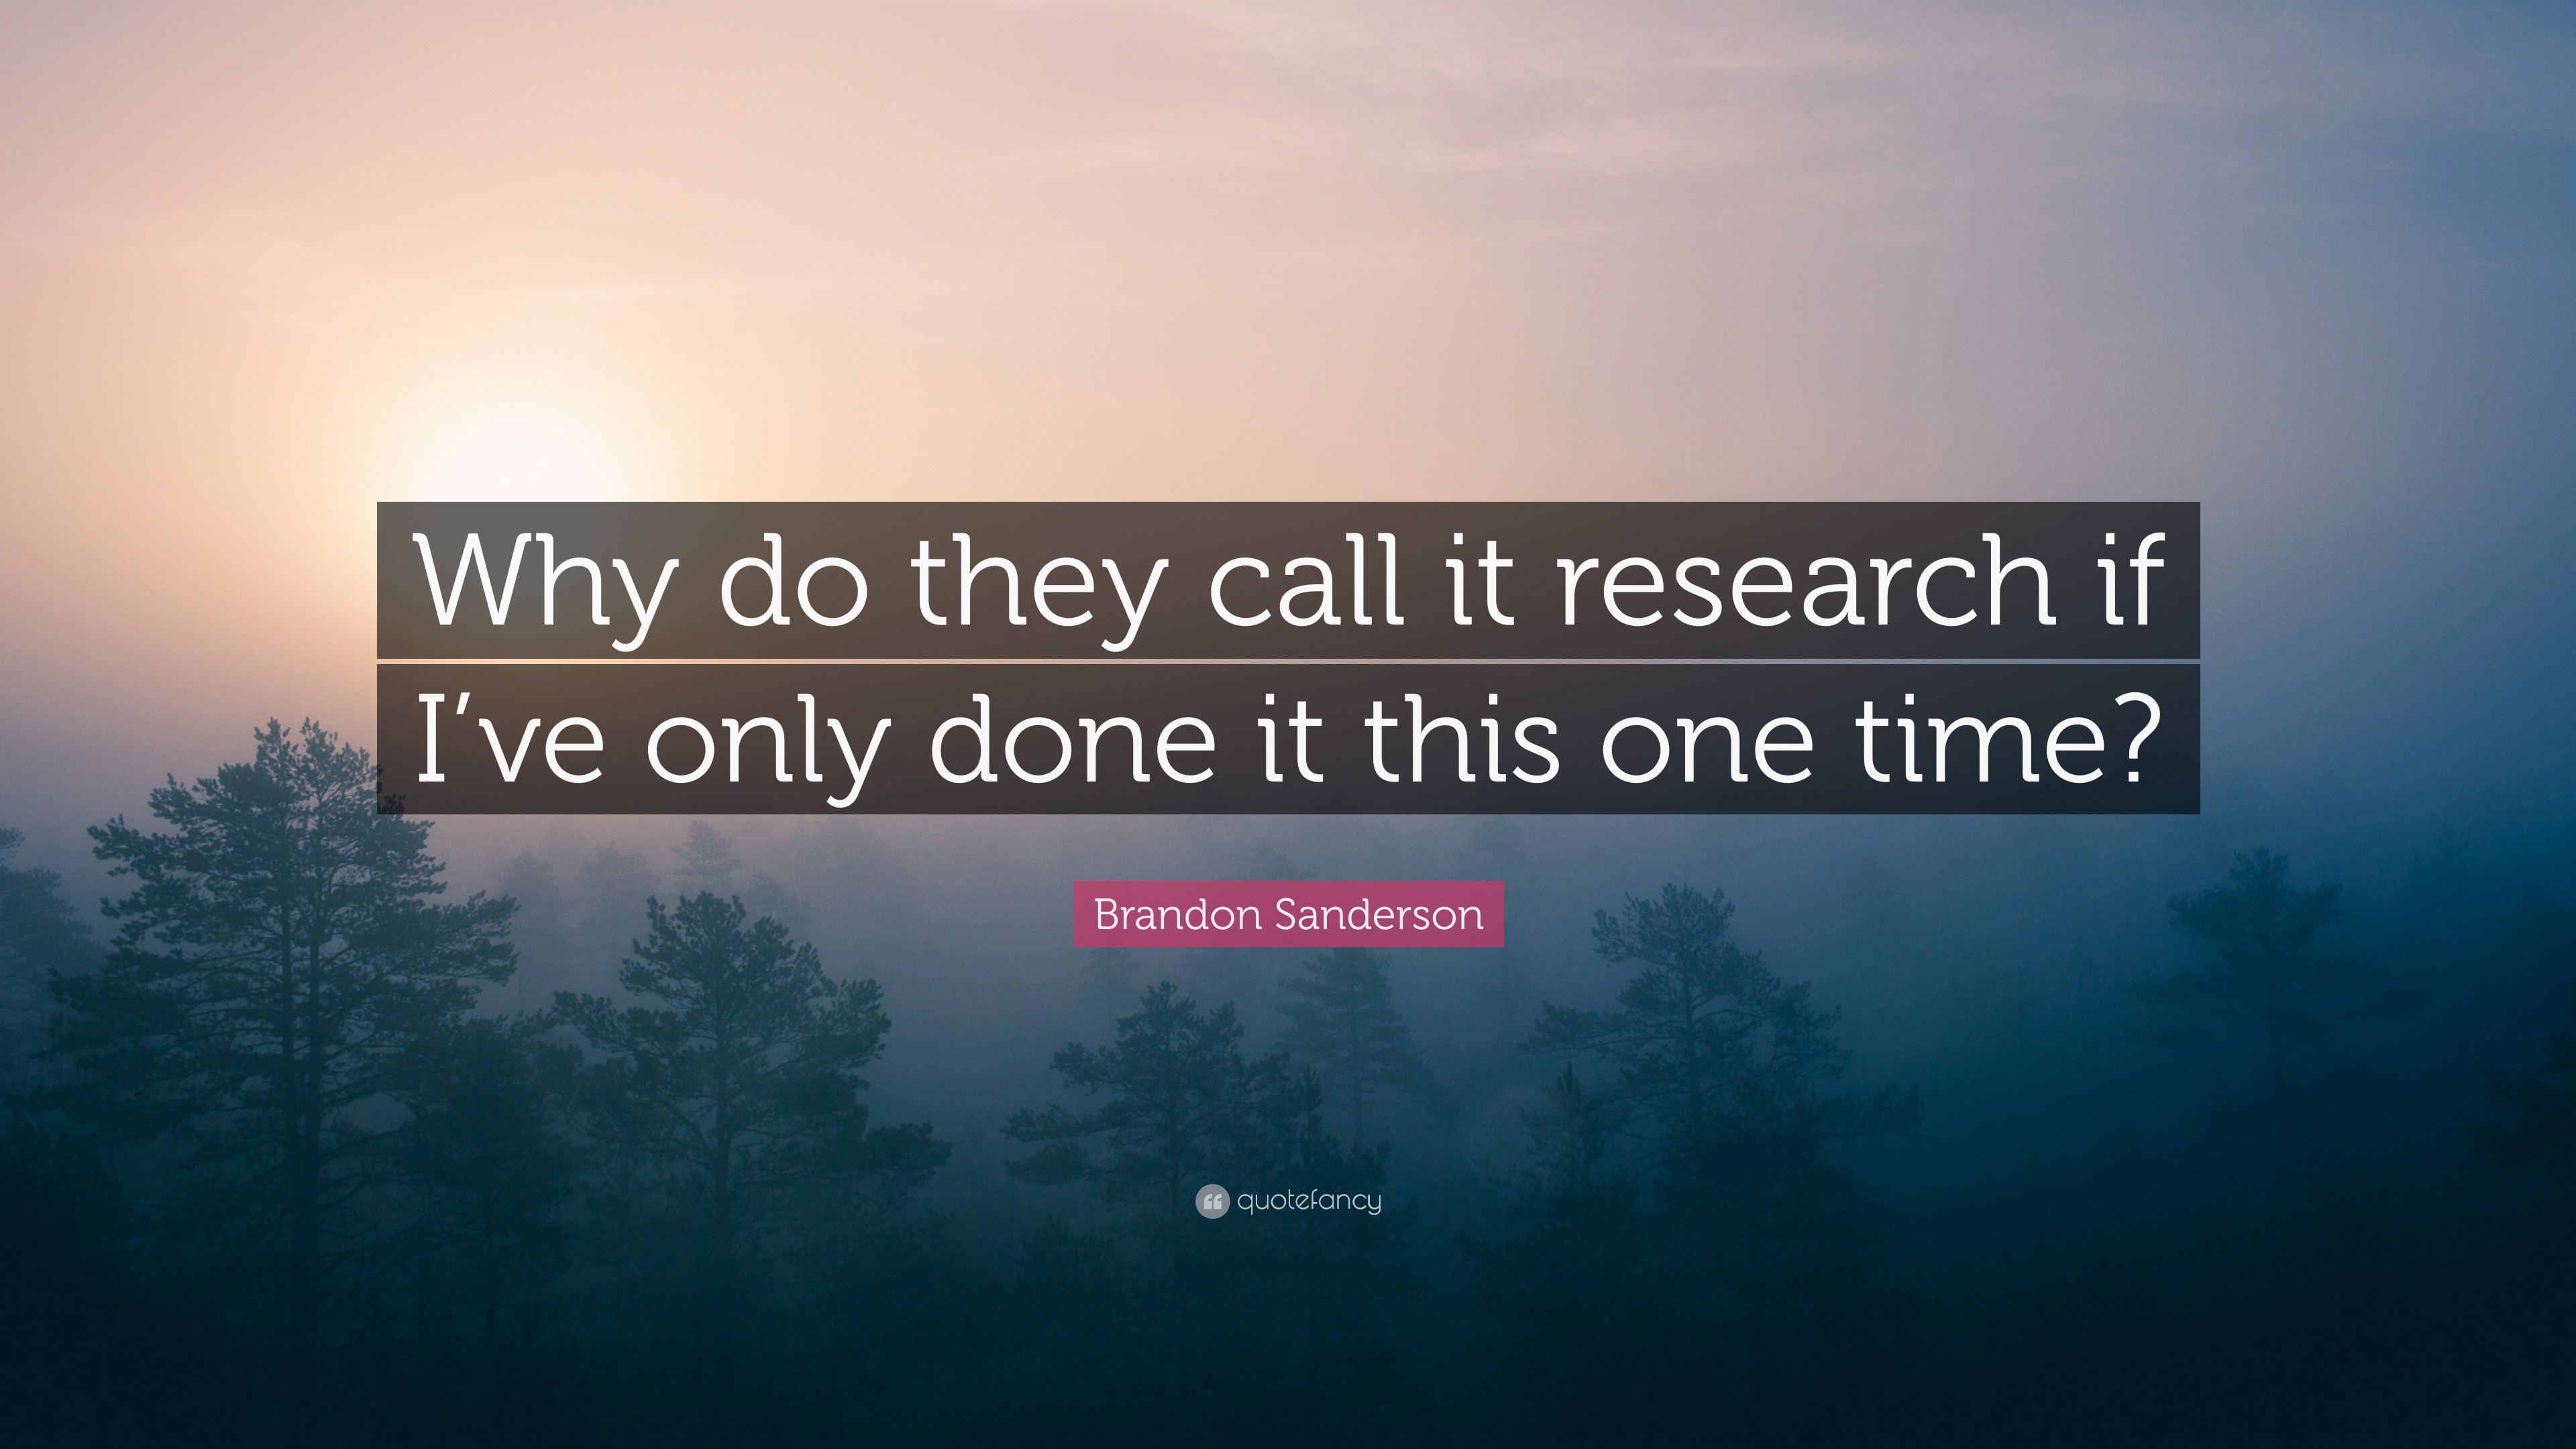 https://quotefancy.com/media/wallpaper/3840x2160/4971999-Brandon-Sanderson-Quote-Why-do-they-call-it-research-if-I-ve-only.jpg